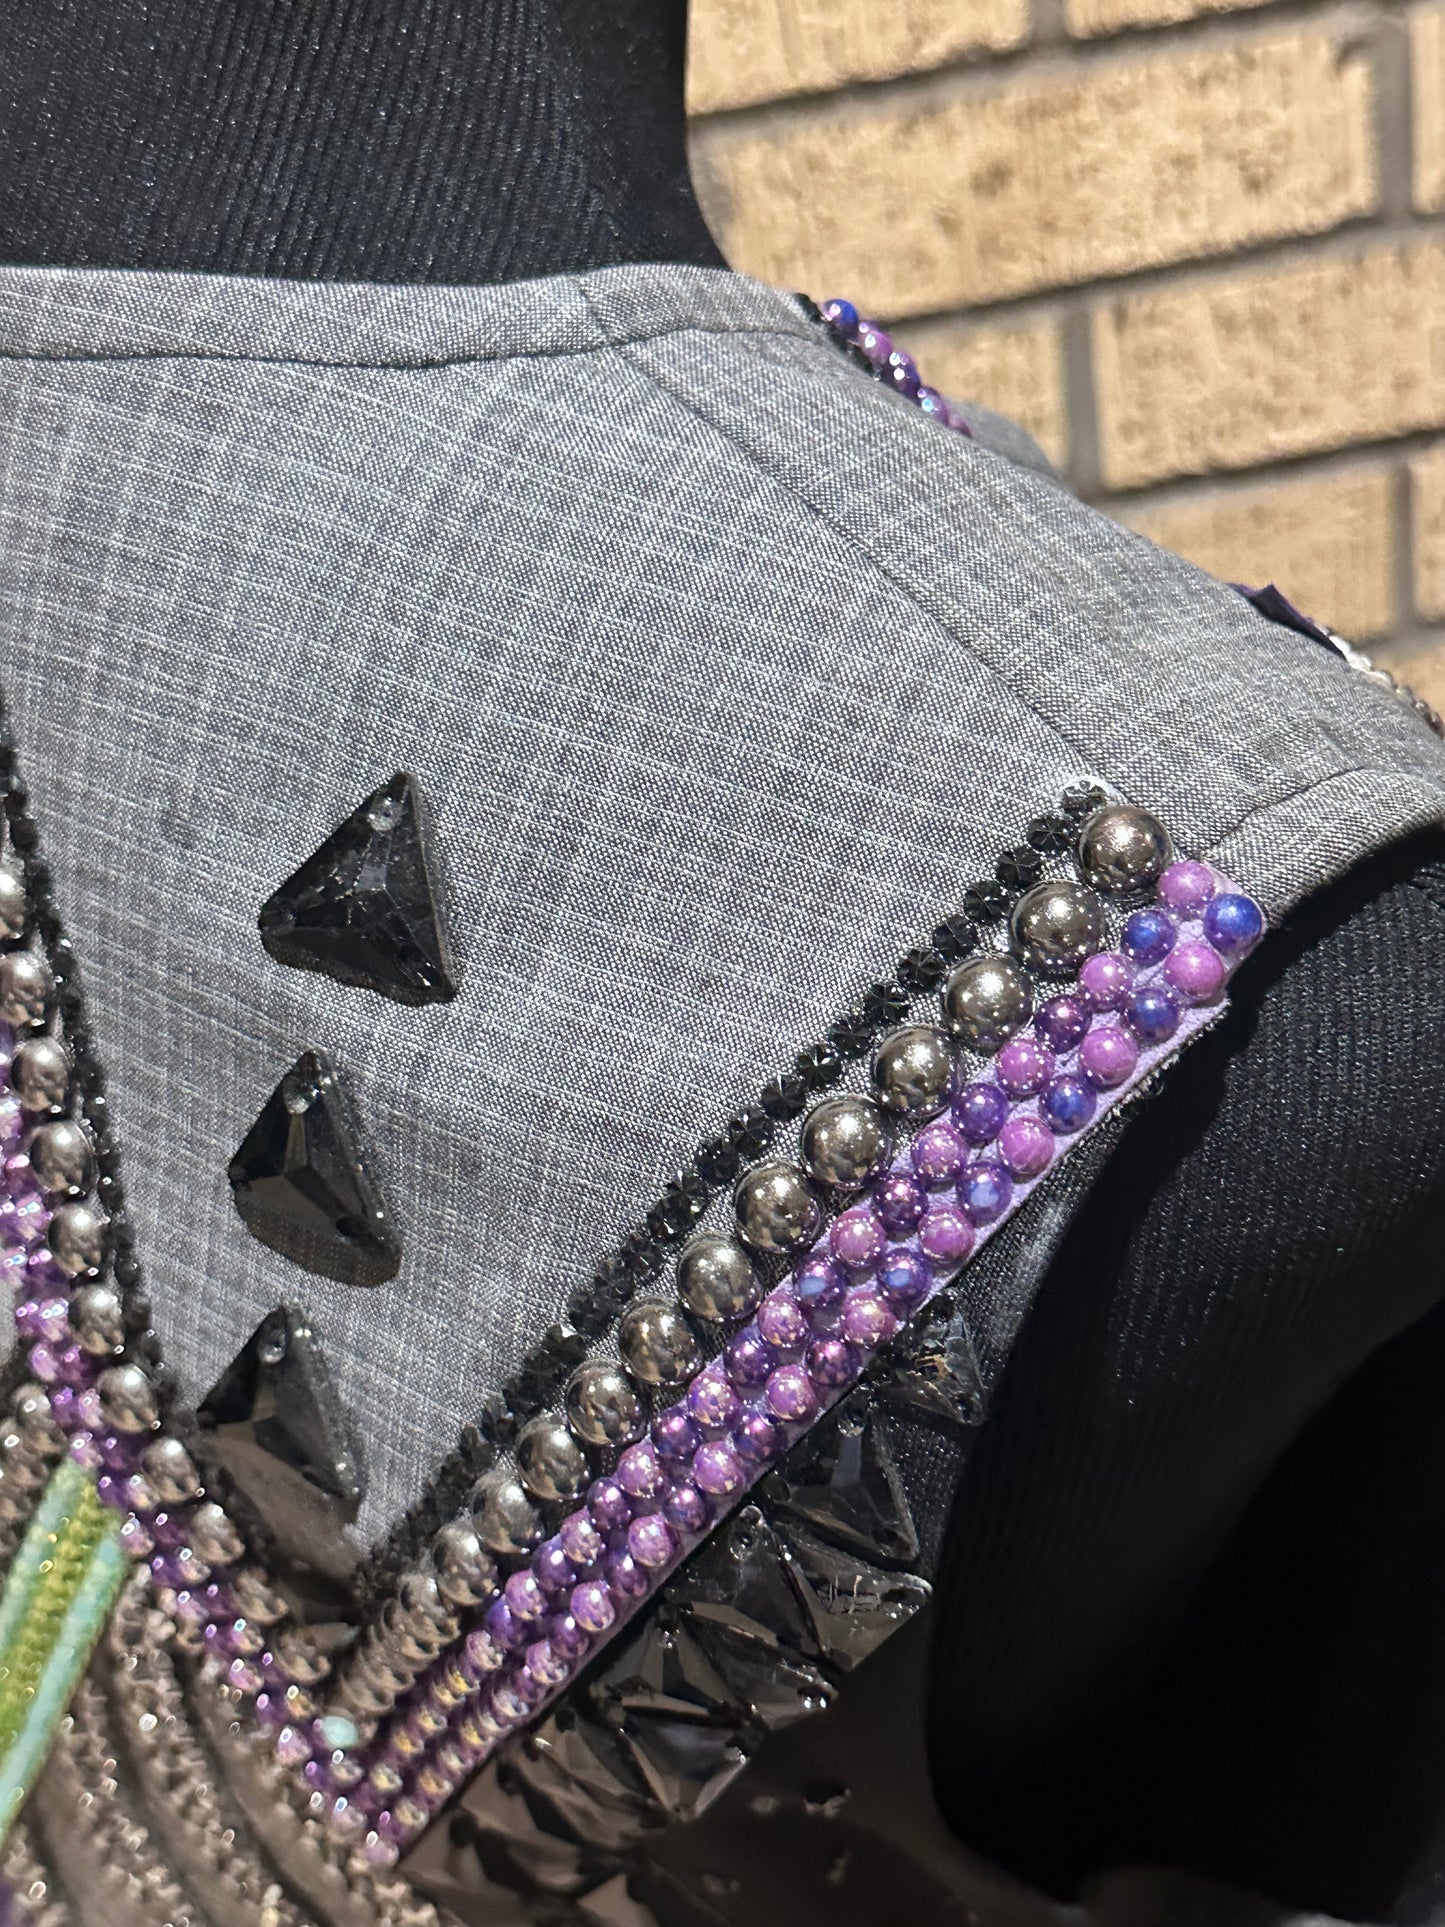 Size medium vest with silver, charcoal grey, purple and a hint of green